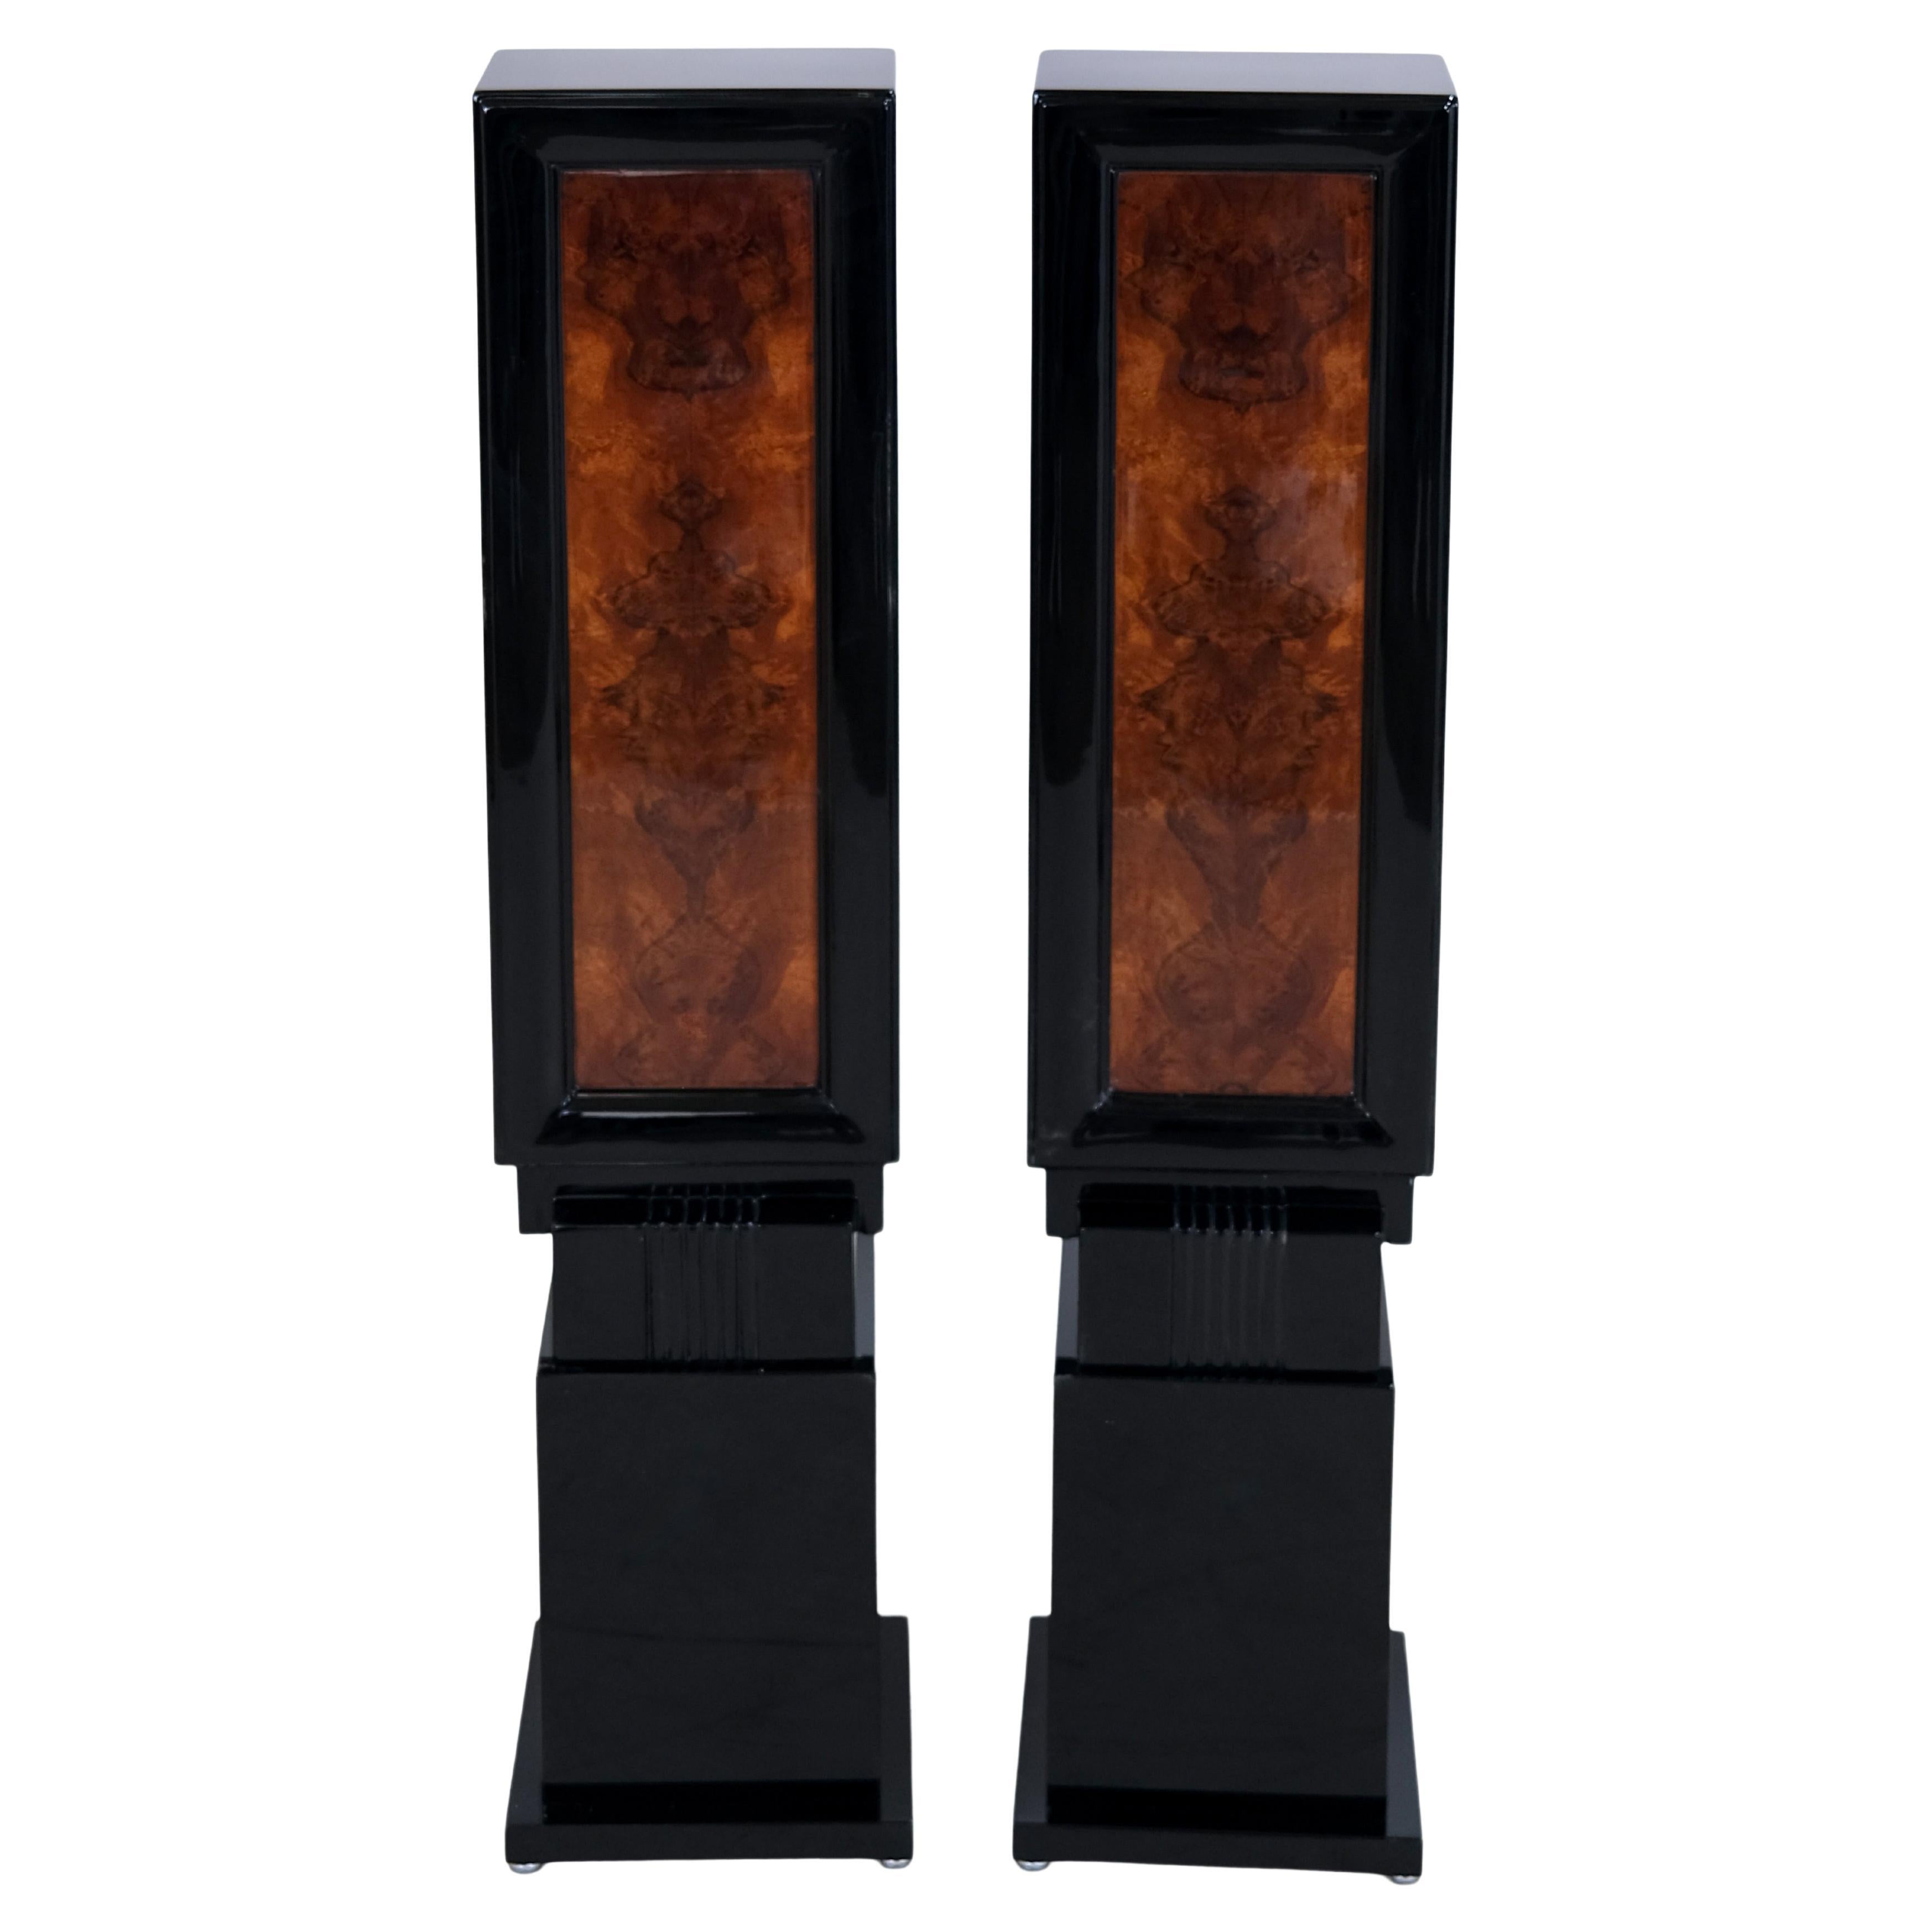 Pair of columns in nut wood and black lacquer

Pair of columns
Piano lacquer in black high gloss
Front and back in nutwood, high gloss lacquer

Original Art Deco, France 1930s

Also available separately

Dimensions, per object:
Top: 23 x 13.5